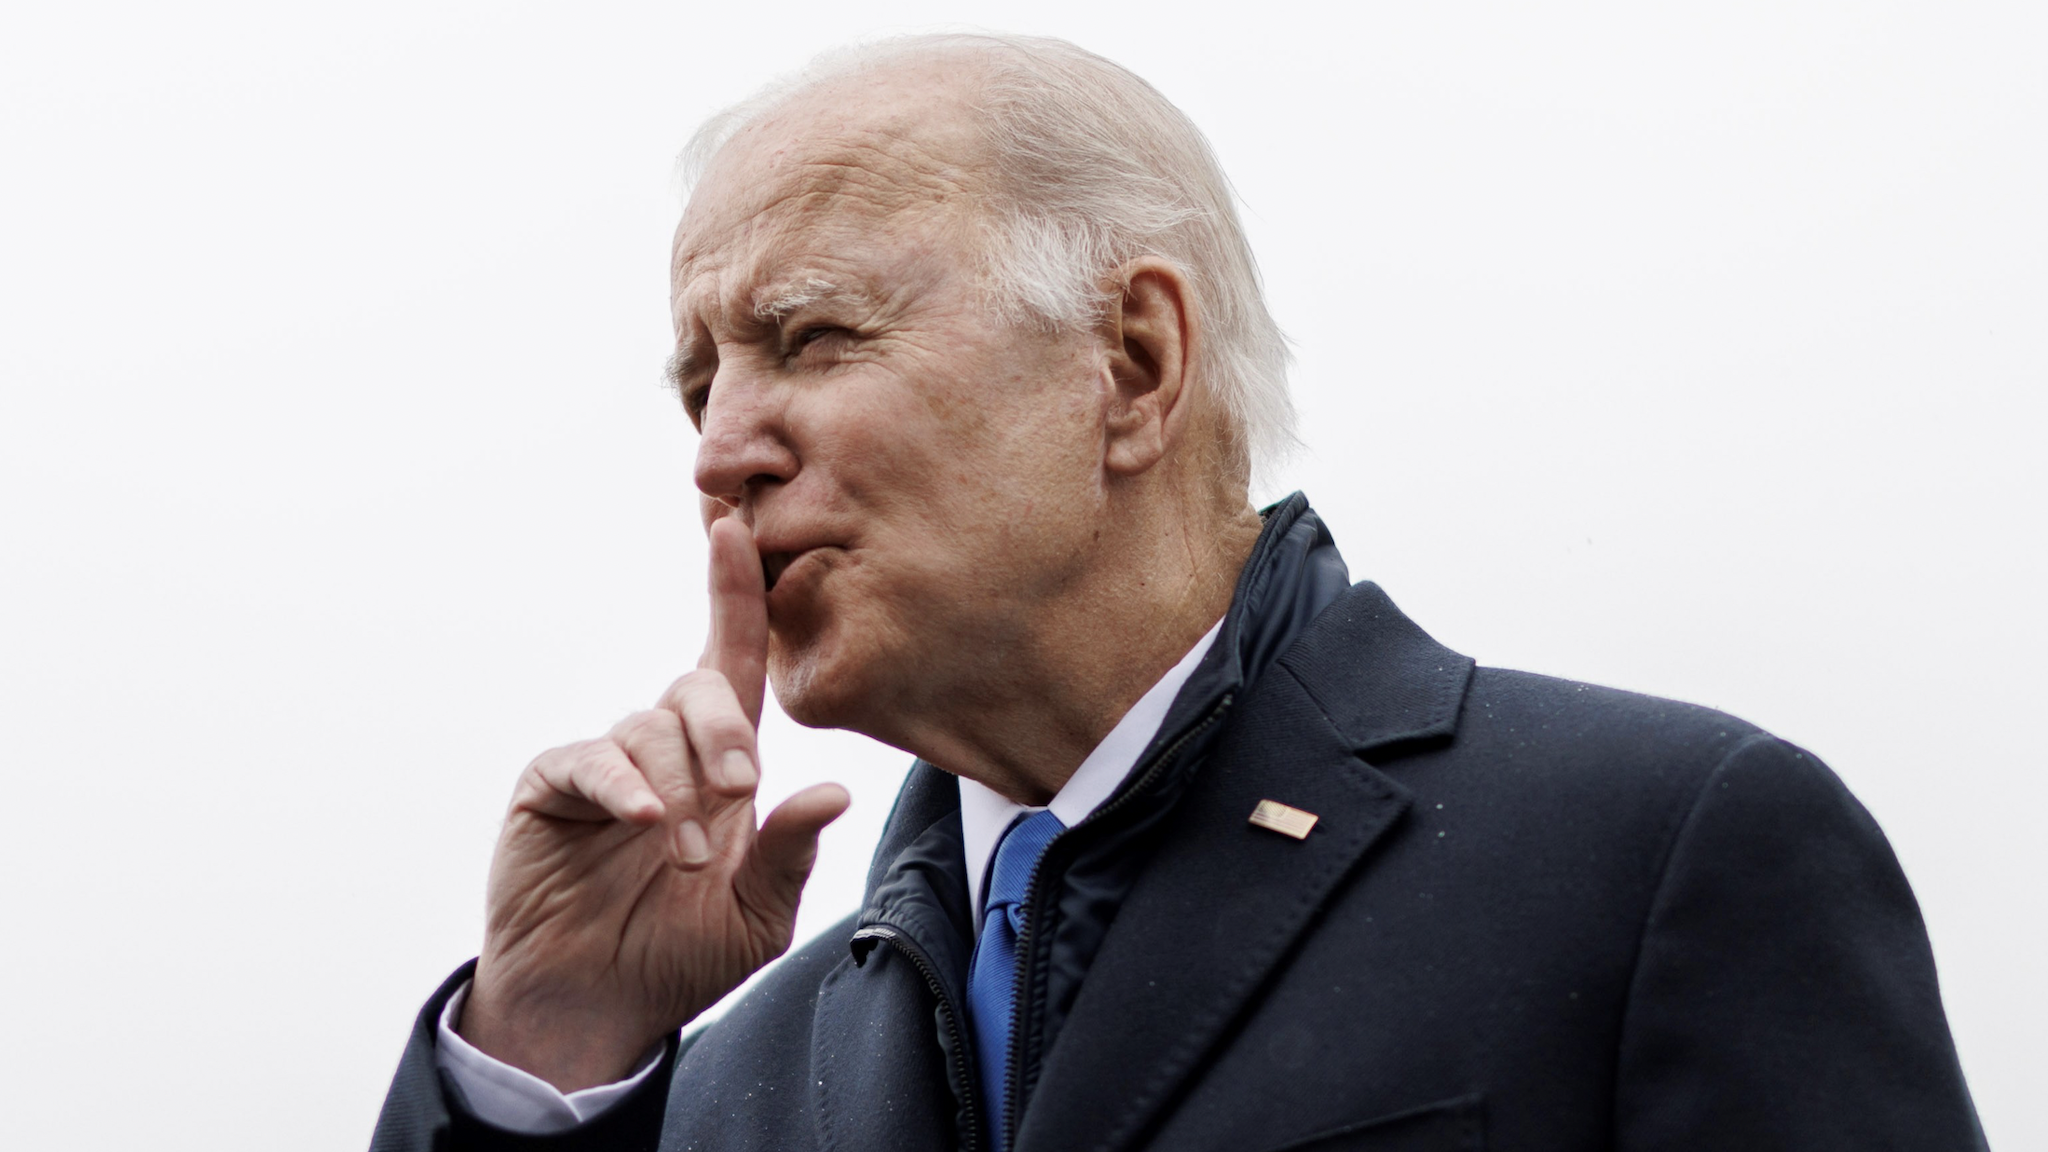 U.S. President Joe Biden leaves the White House in Washington, D.C., the United States, on Dec. 8, 2021. Biden on Wednesday signed an executive order that requires the federal government to achieve a goal of net-zero carbon emissions by 2050.